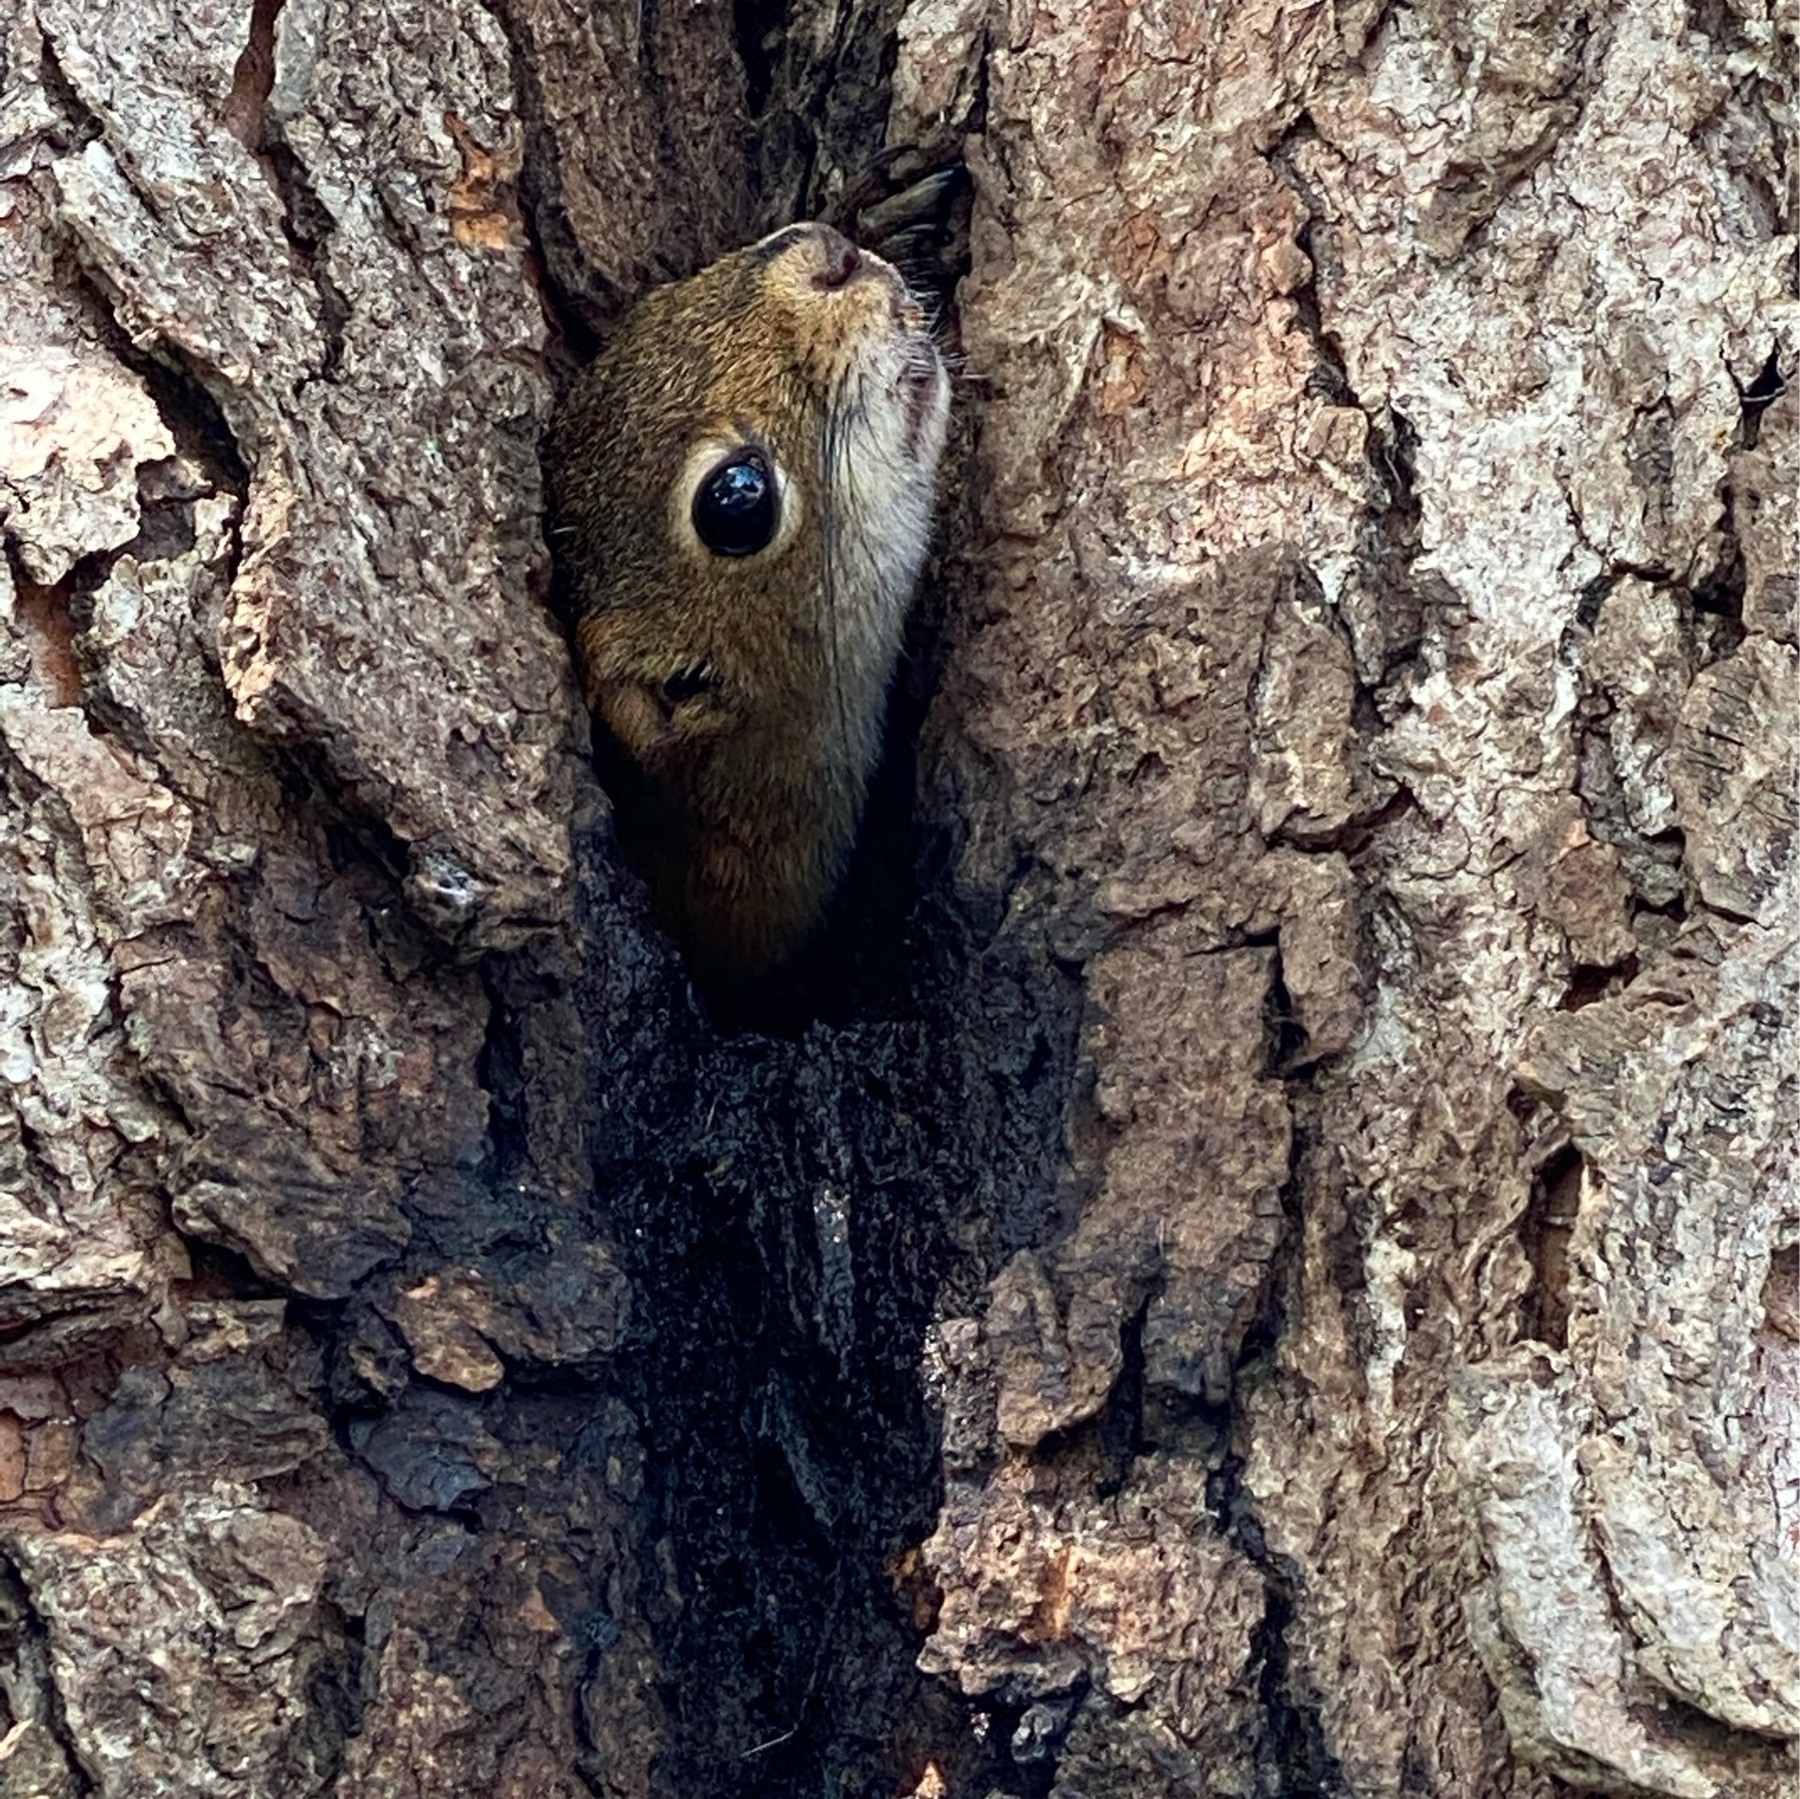 A squirrel peeking their head out of a crack on a tree.